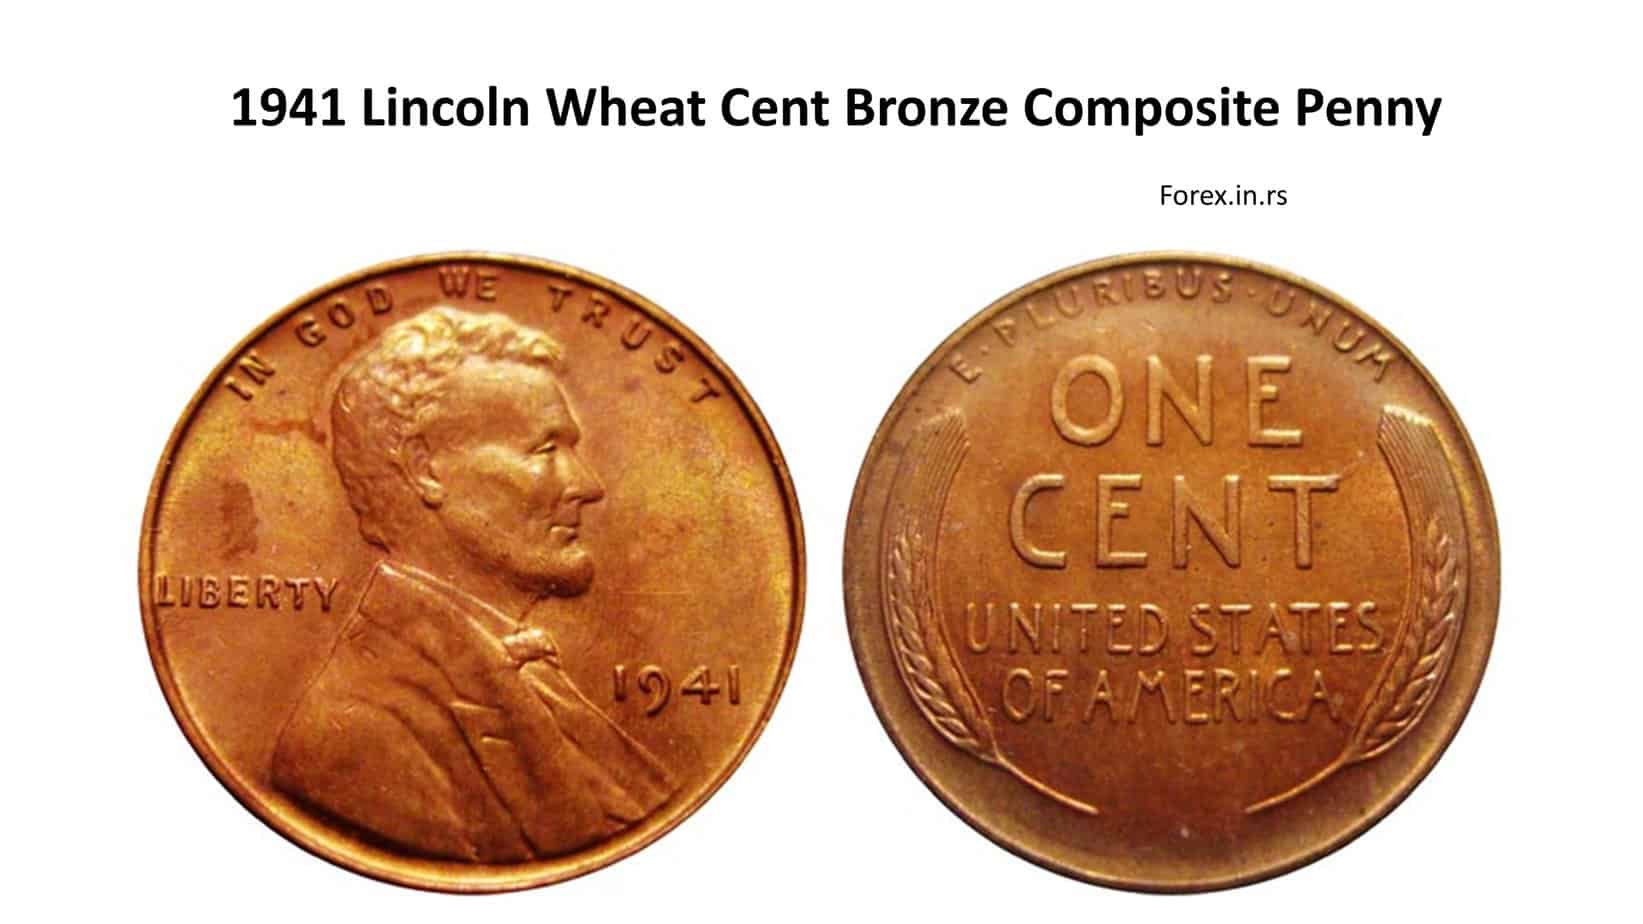 1941 penny - 1941 Lincoln Wheat Cent Bronze Composite Penny